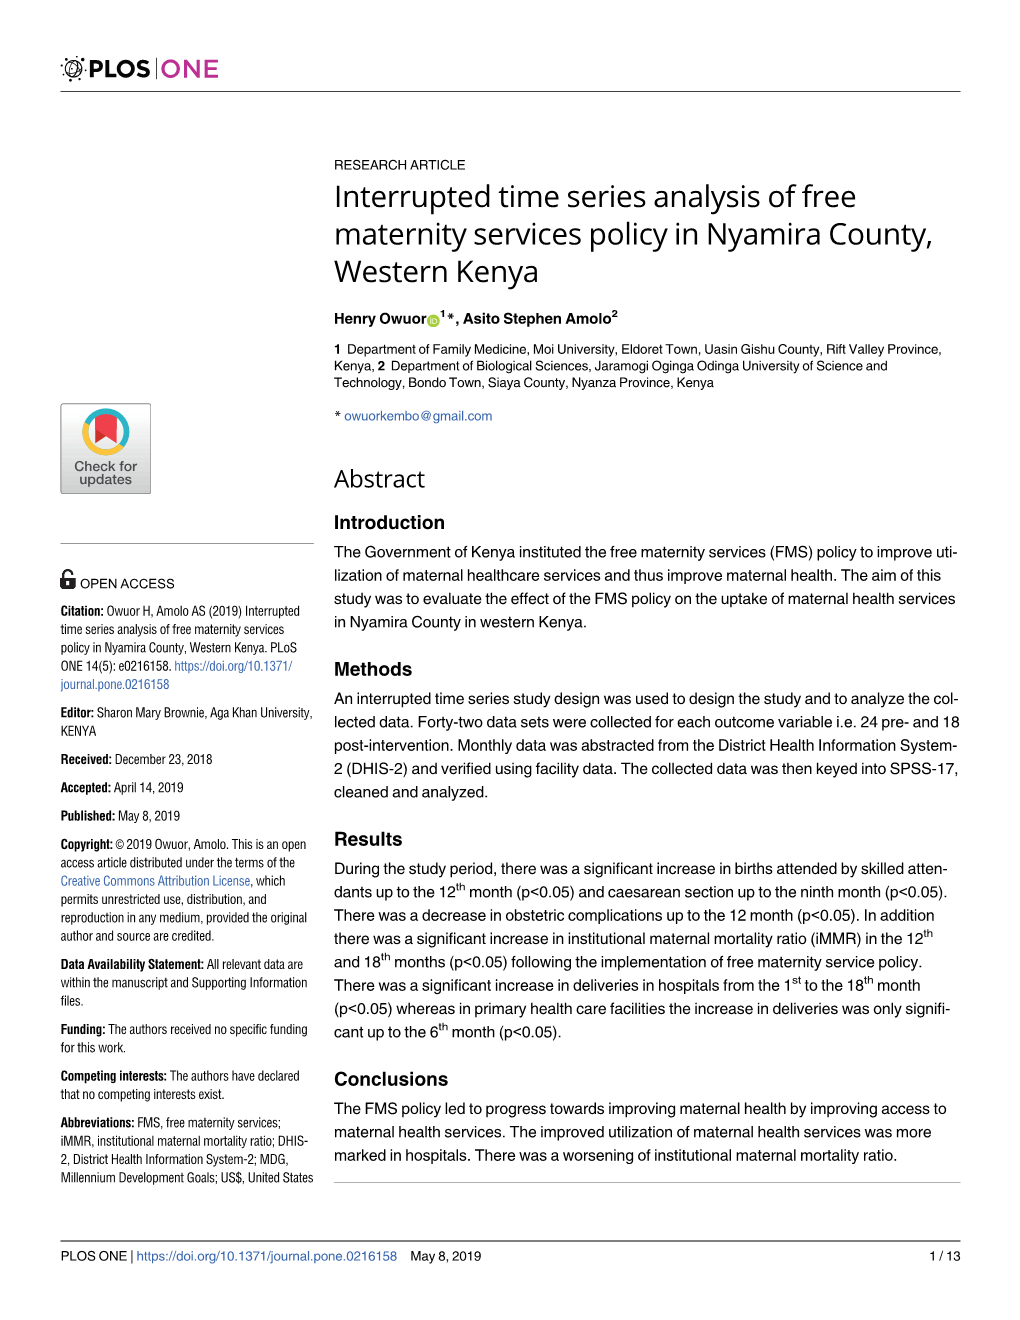 Interrupted Time Series Analysis of Free Maternity Services Policy in Nyamira County, Western Kenya